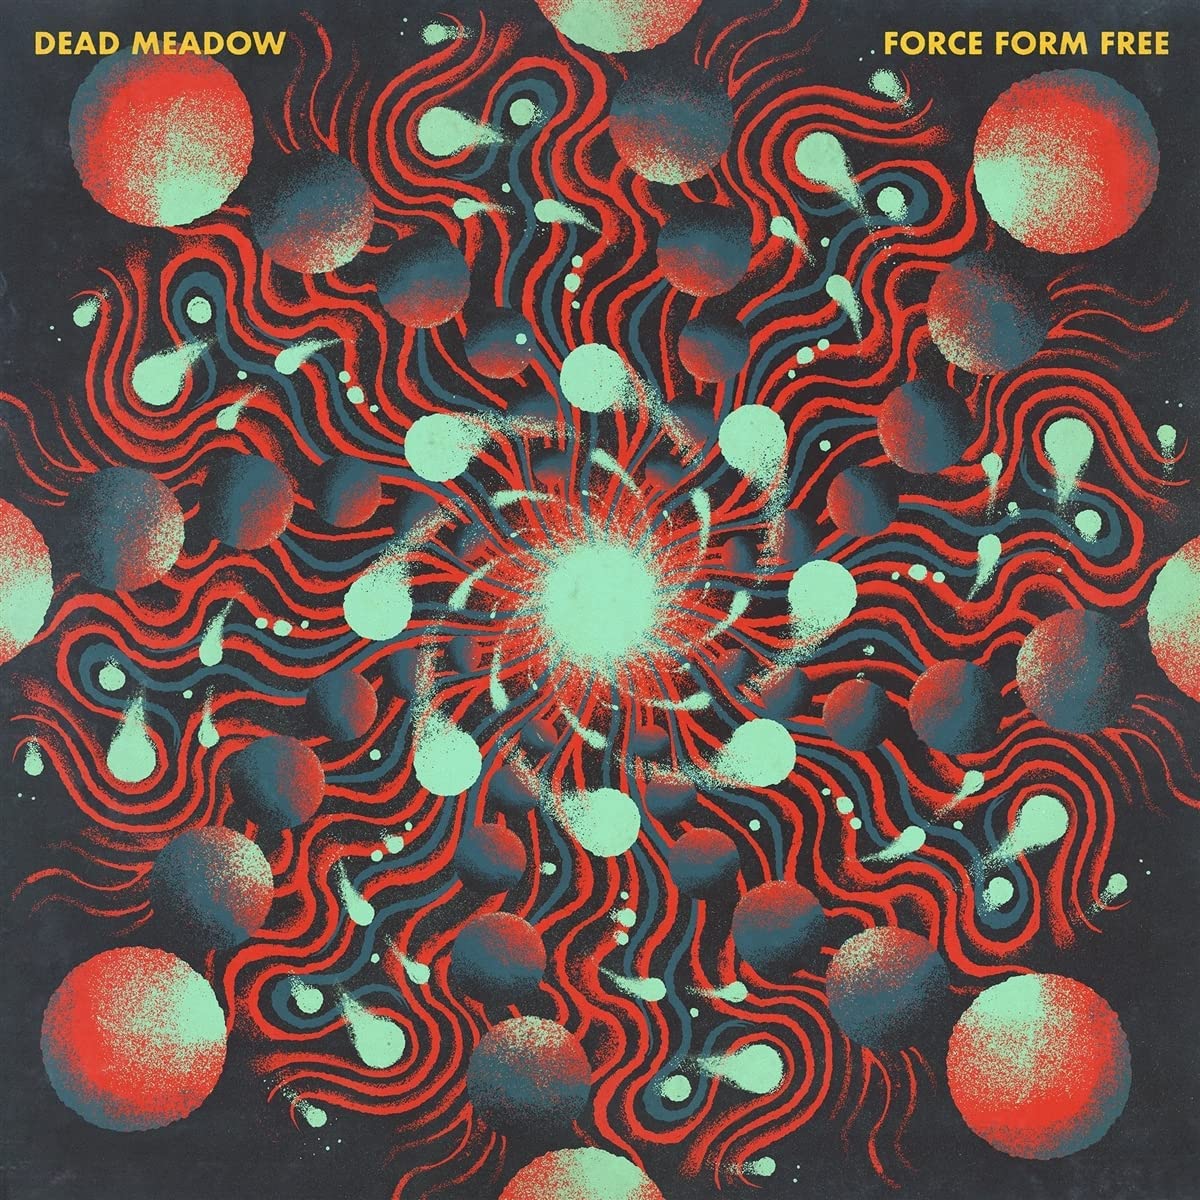 DEAD MEADOW – ‘Force Form Free’ cover album